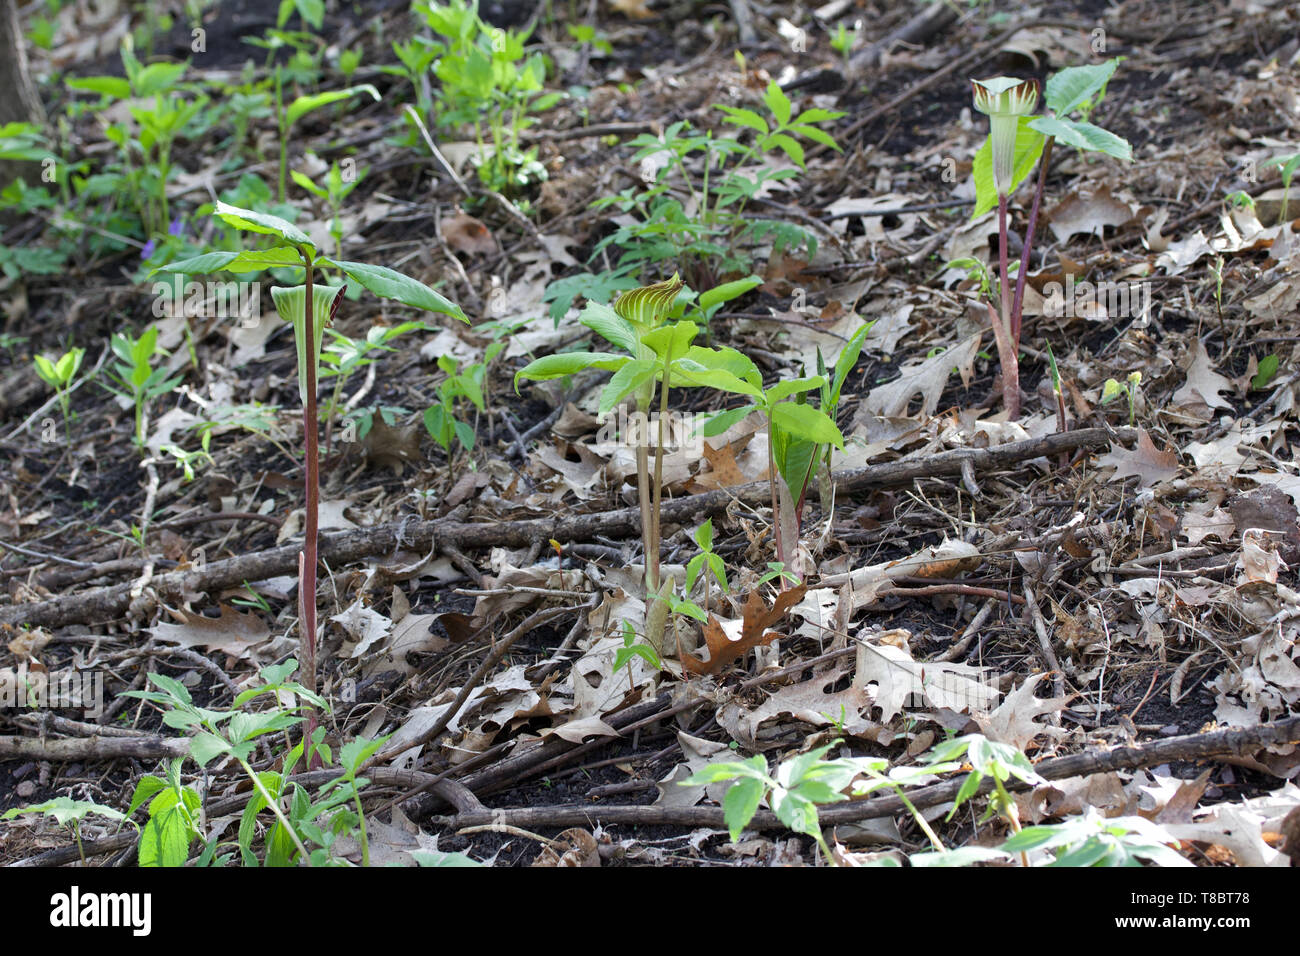 A group of Jack-in-the-Pulpit wildflowers bloom together in their native forest habitat Stock Photo